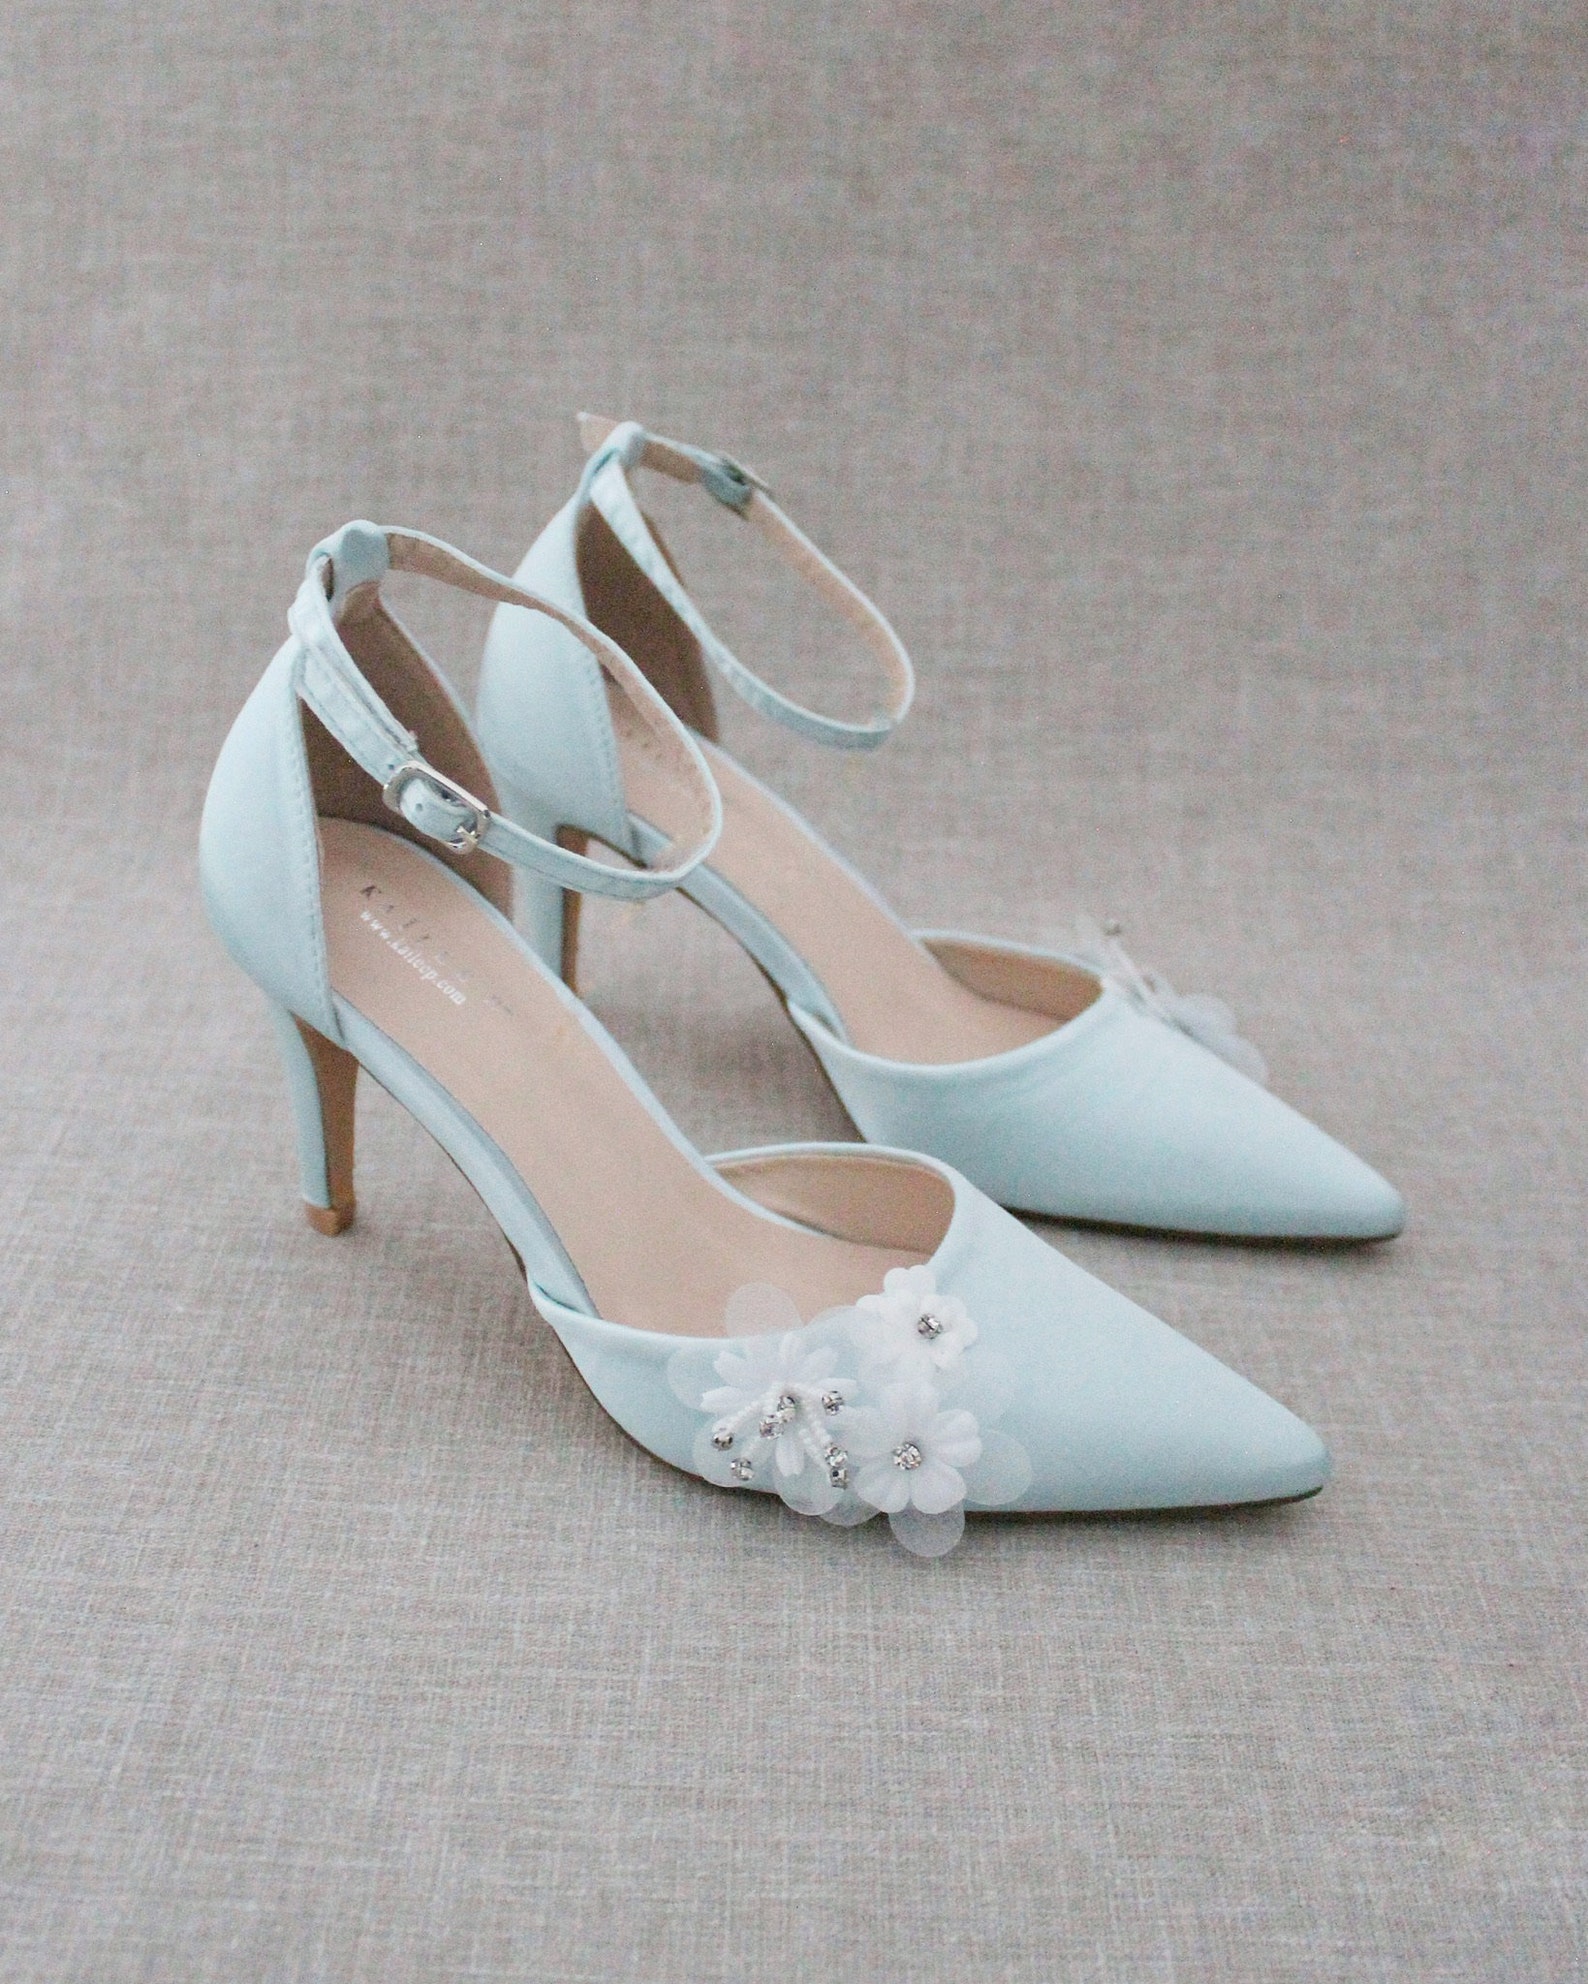 Light Blue Satin Pointy Toe Heels With WHITE FLOWER APPLIQUES - Etsy